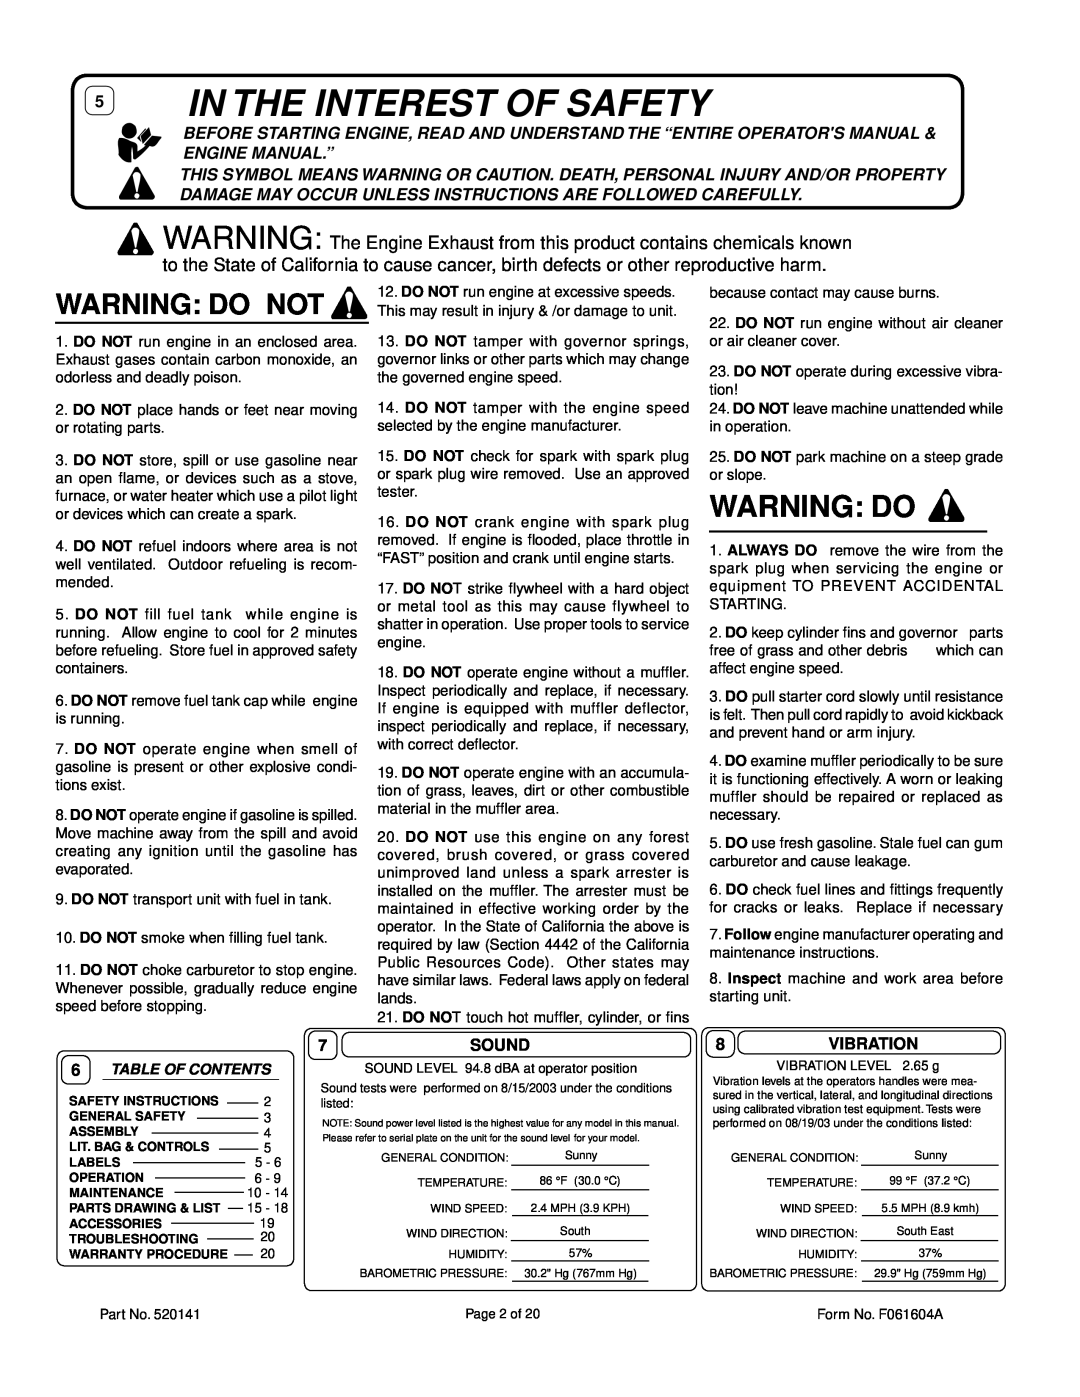 Briggs & Stratton FM3300E owner manual 5IN THE INTEREST OF SAFETY, Warning Do Not 